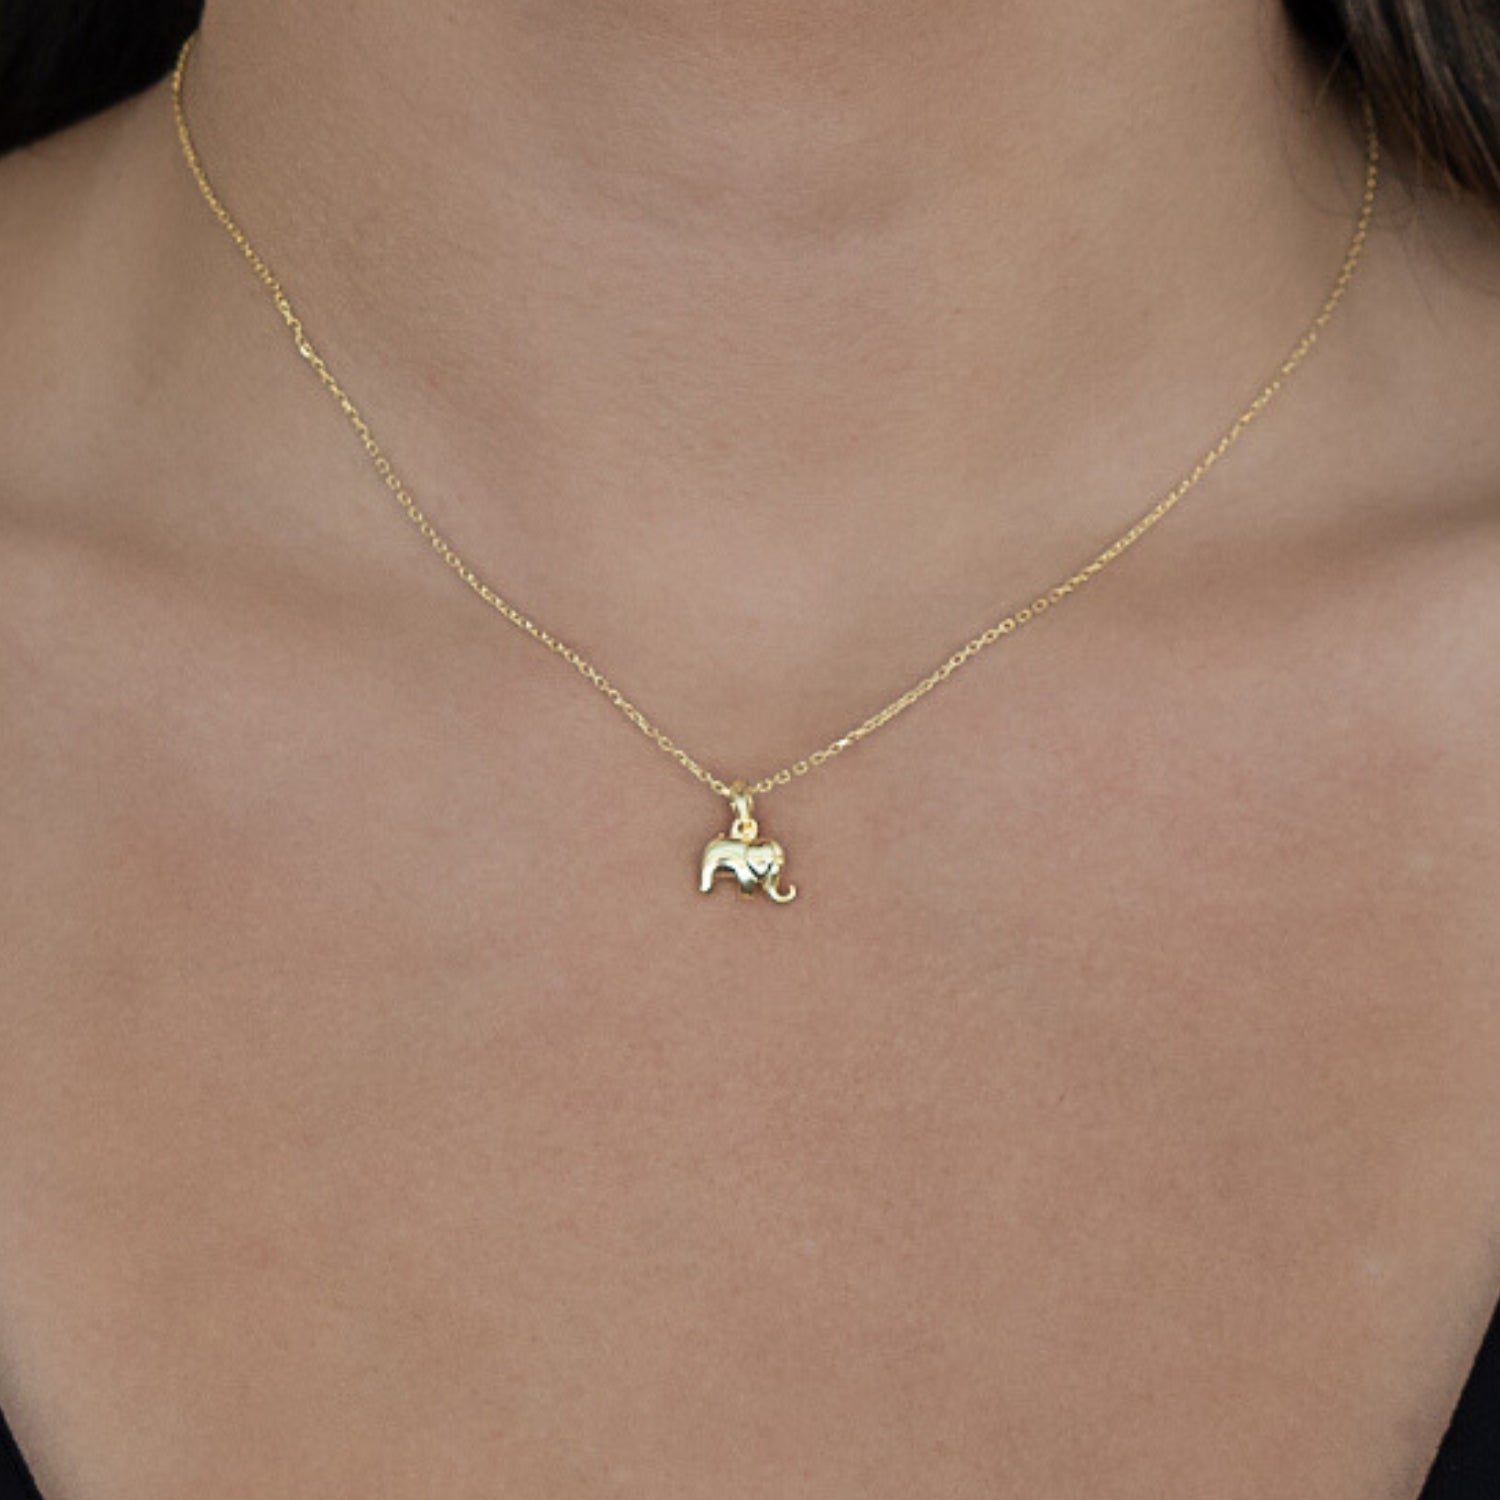 A model wearing the Dainty Gold Elephant Necklace, showcasing its grace and elegance as it rests delicately against their collarbone.